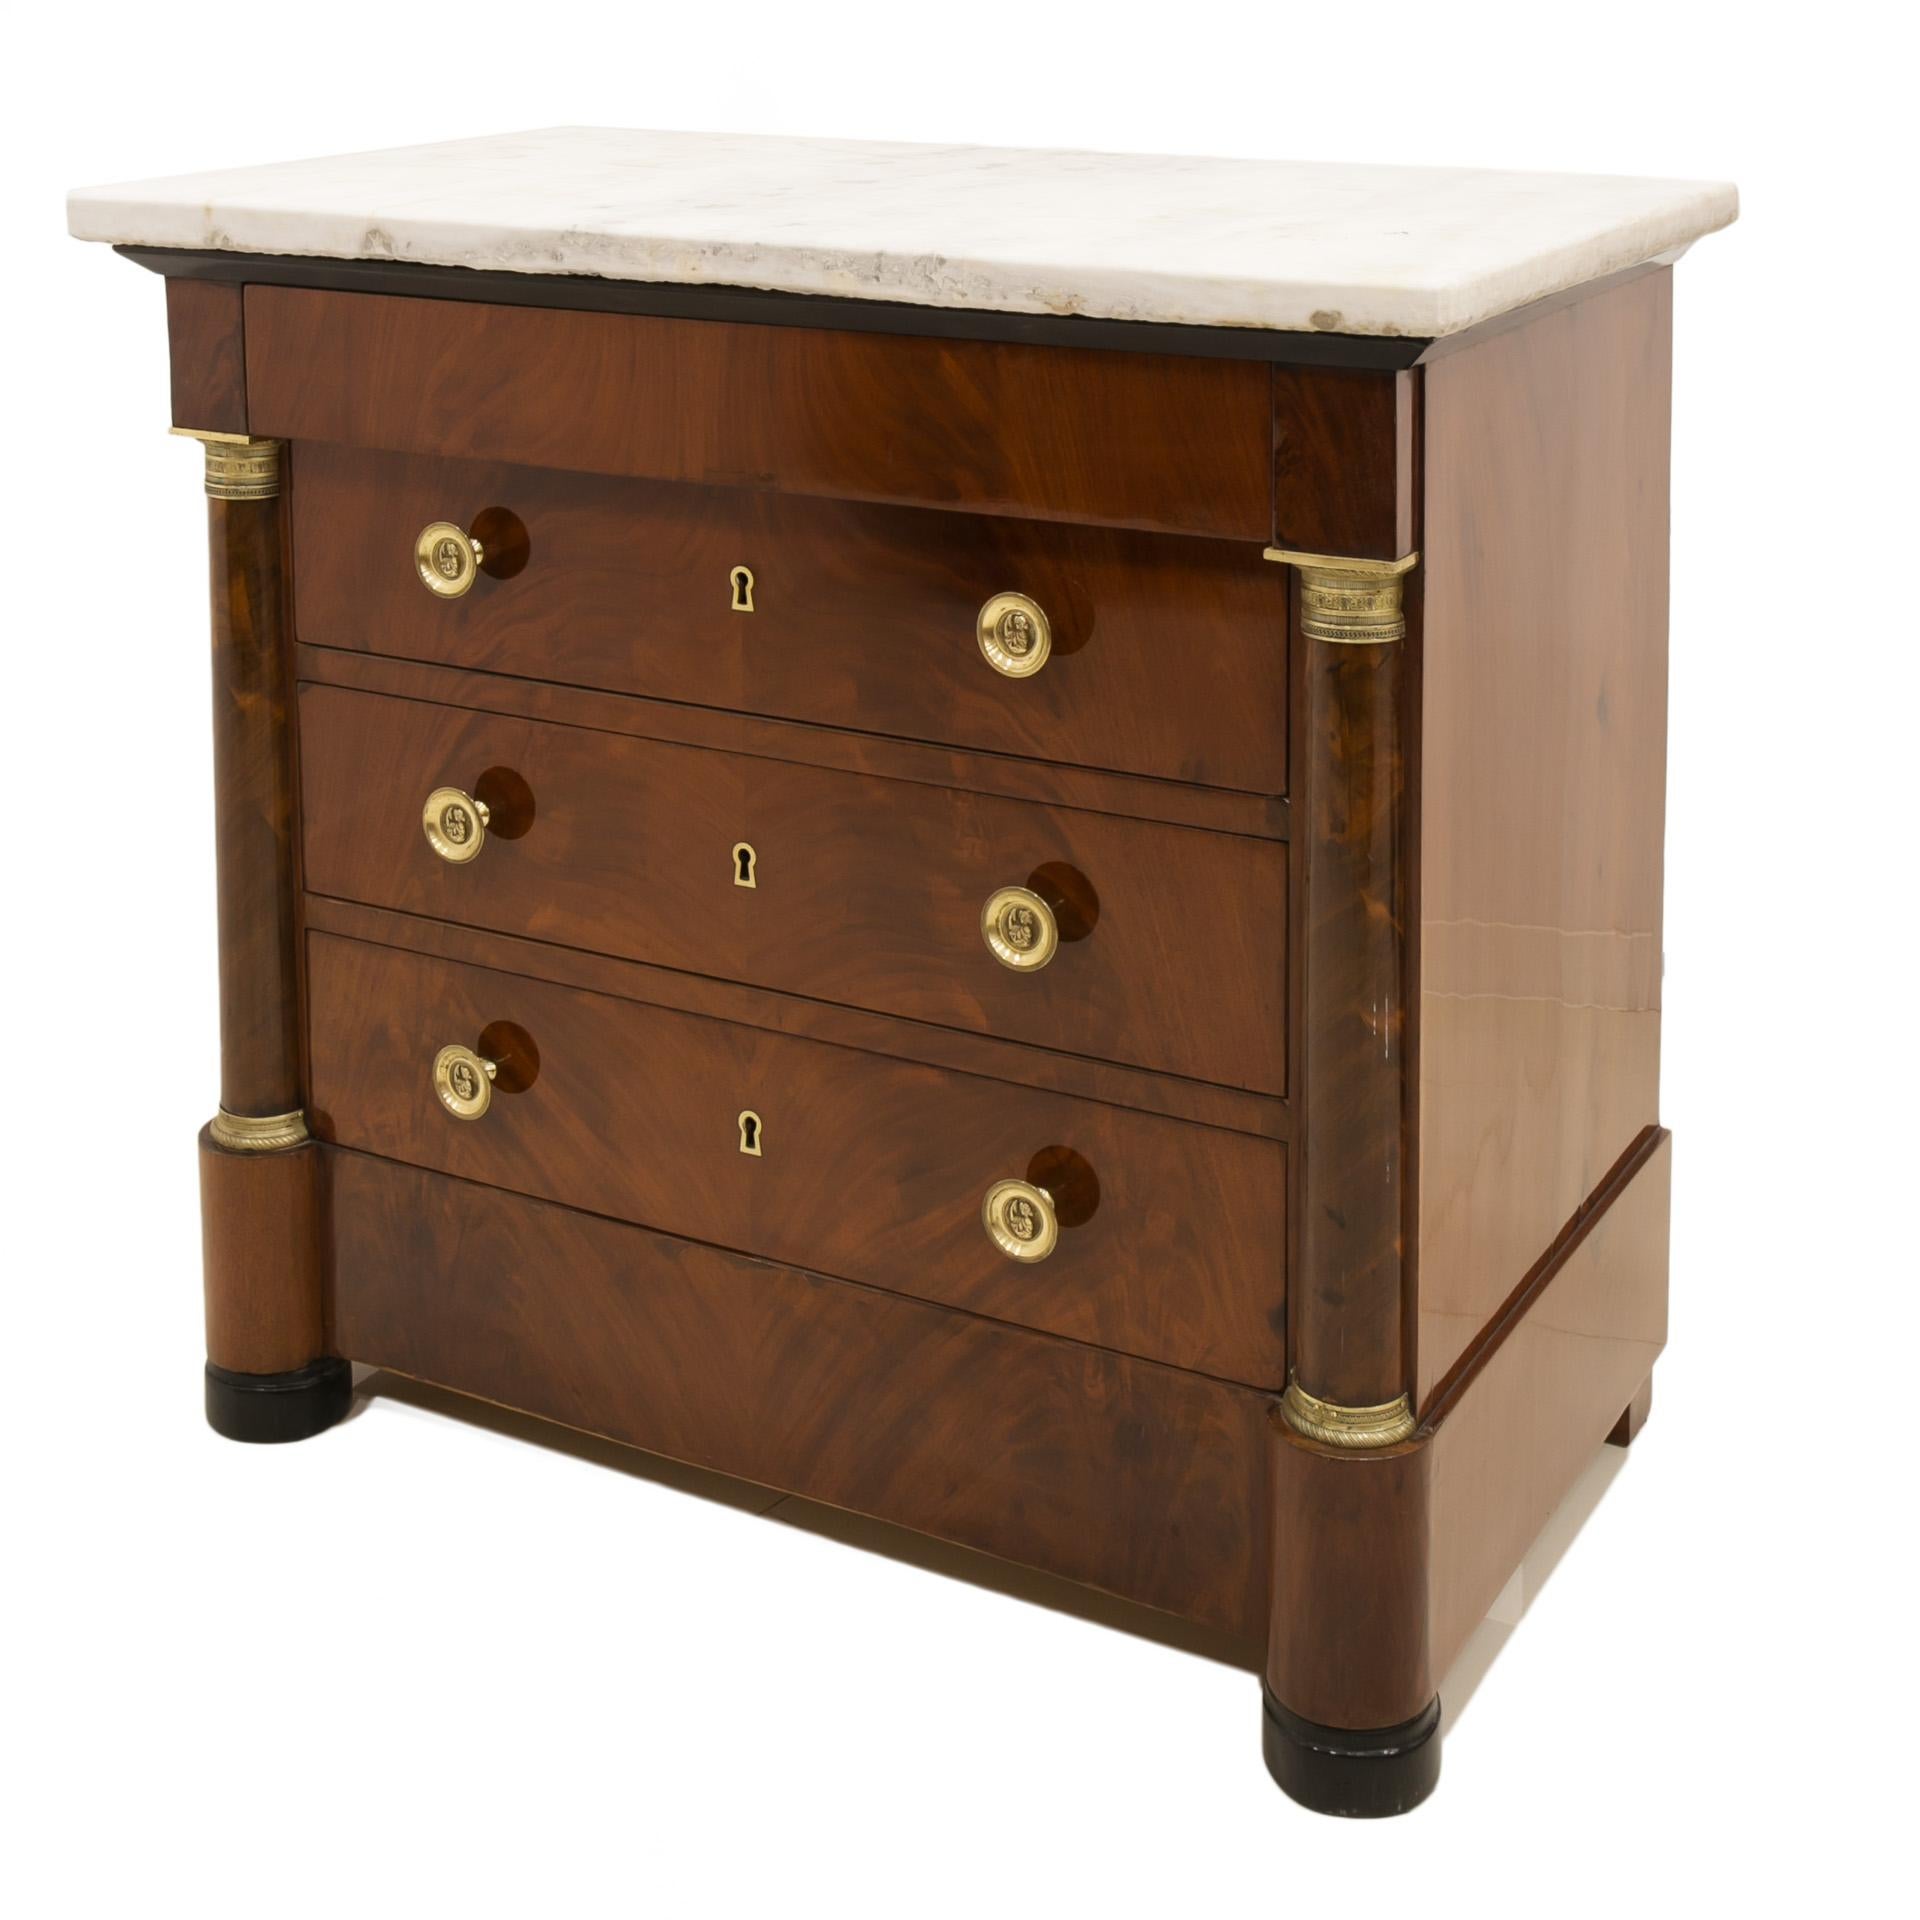 Biedermeier style chest of drawers from 19th century, circa 1830s. This piece of furniture comes from France. It was made of softwood and veneered with beautiful mahogany pyramid veneer. It features 3 drawers lockable with keys and 1 smaller one in